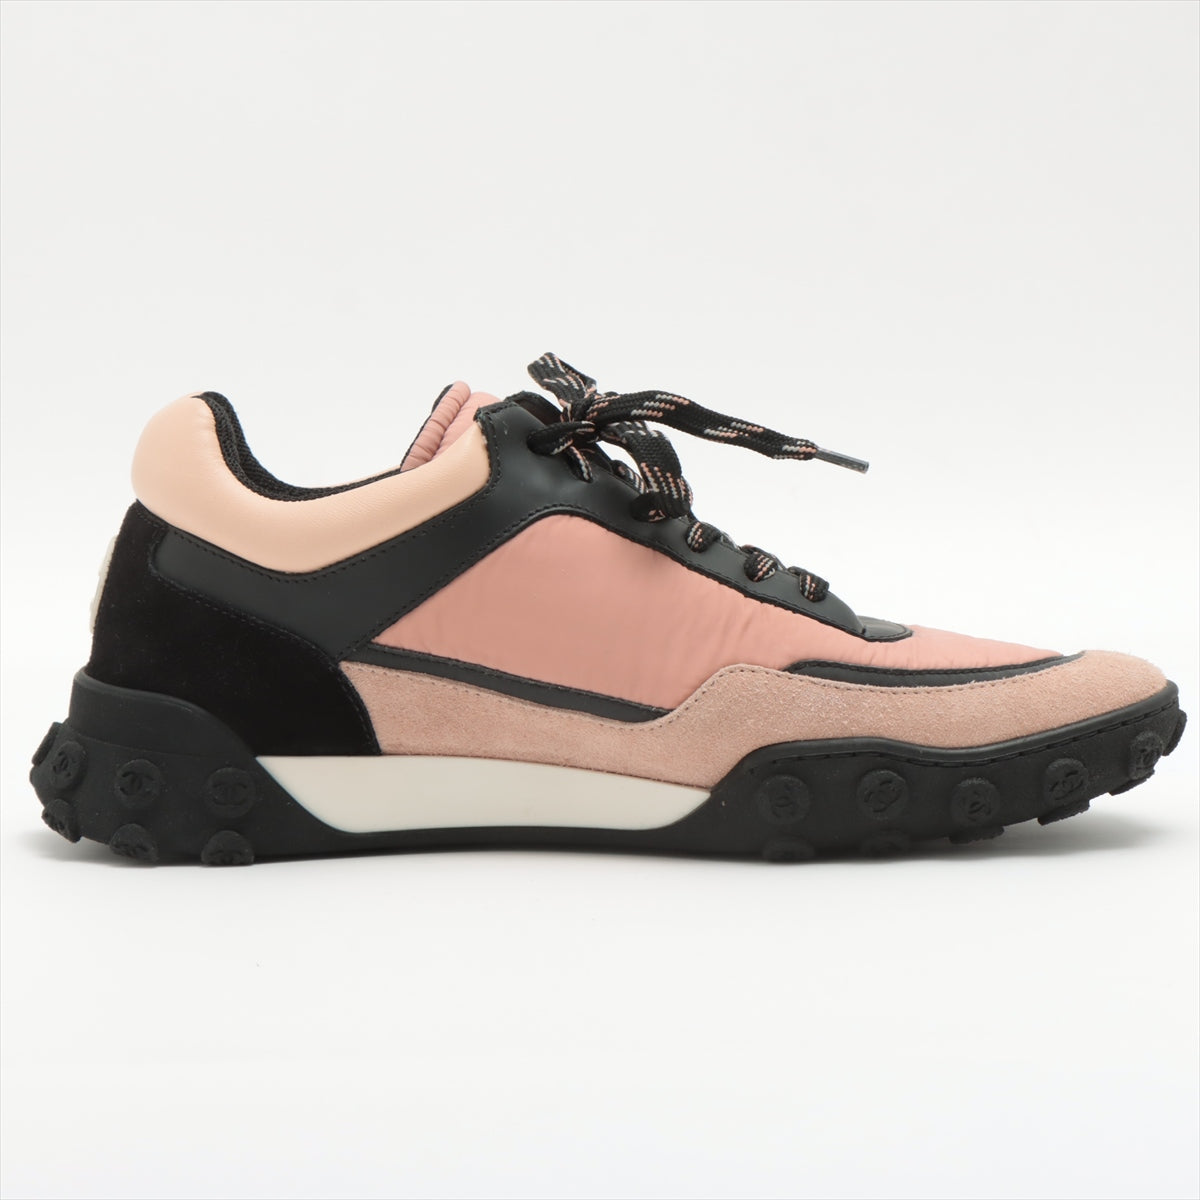 Chanel Coco Mark Suede x nylon Sneakers 38 1/2 Ladies' Black x pink G34086 There is a bag